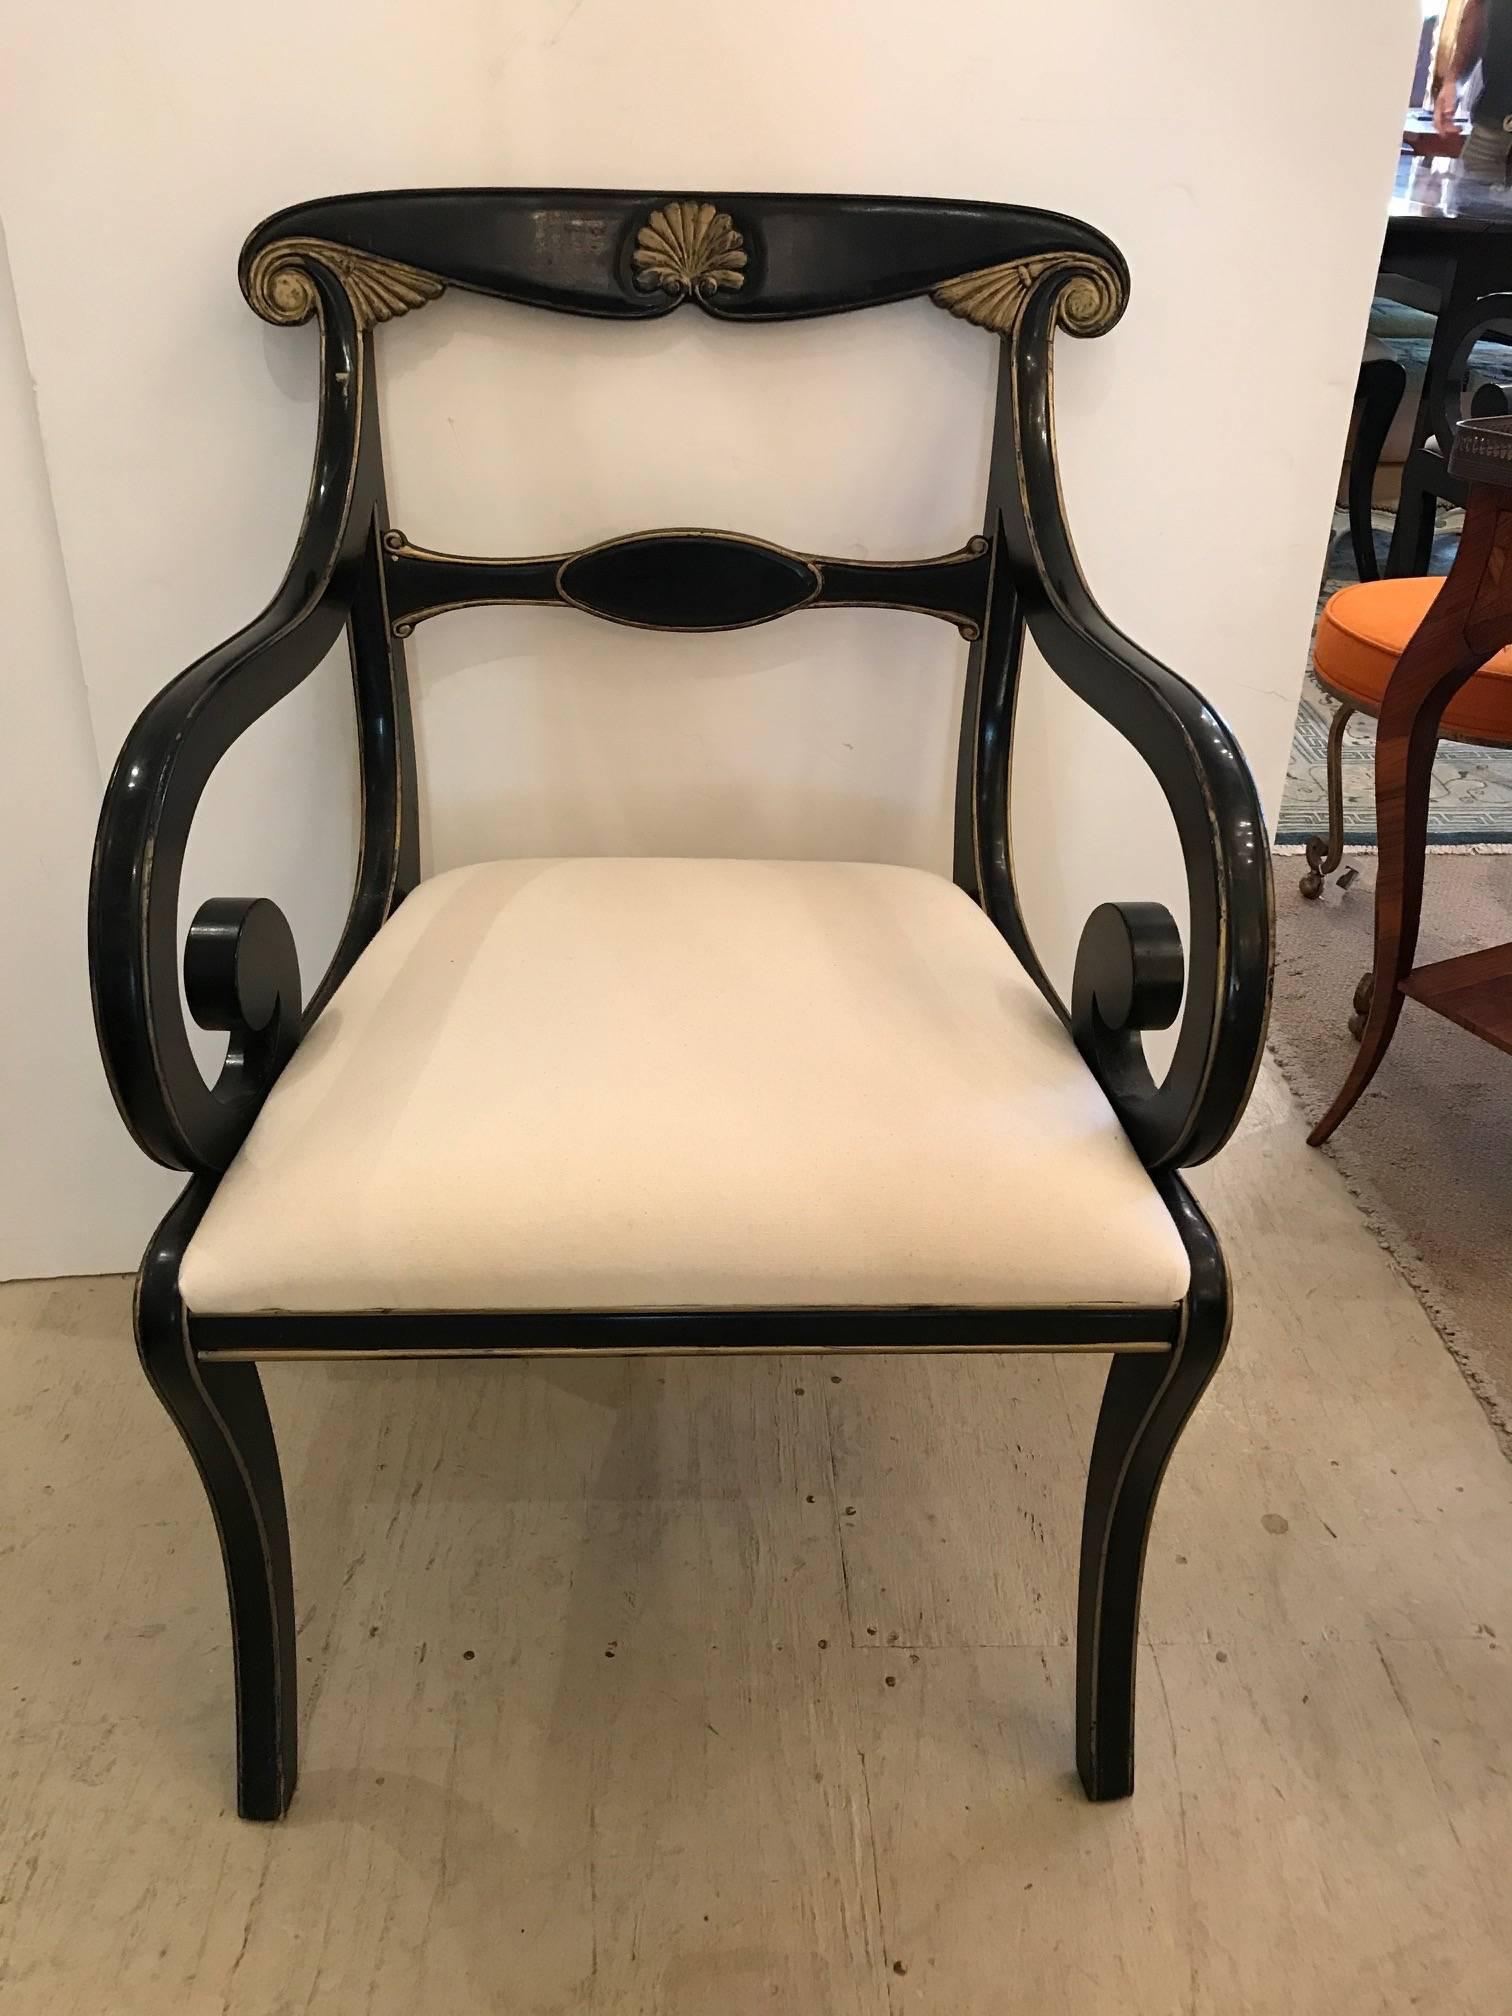 Beautiful ebonized carved wood dining chairs with gold leaf embellishments and newly upholstered white duck seats. Includes two arm chairs and six side chairs.
Six side chairs 34.5